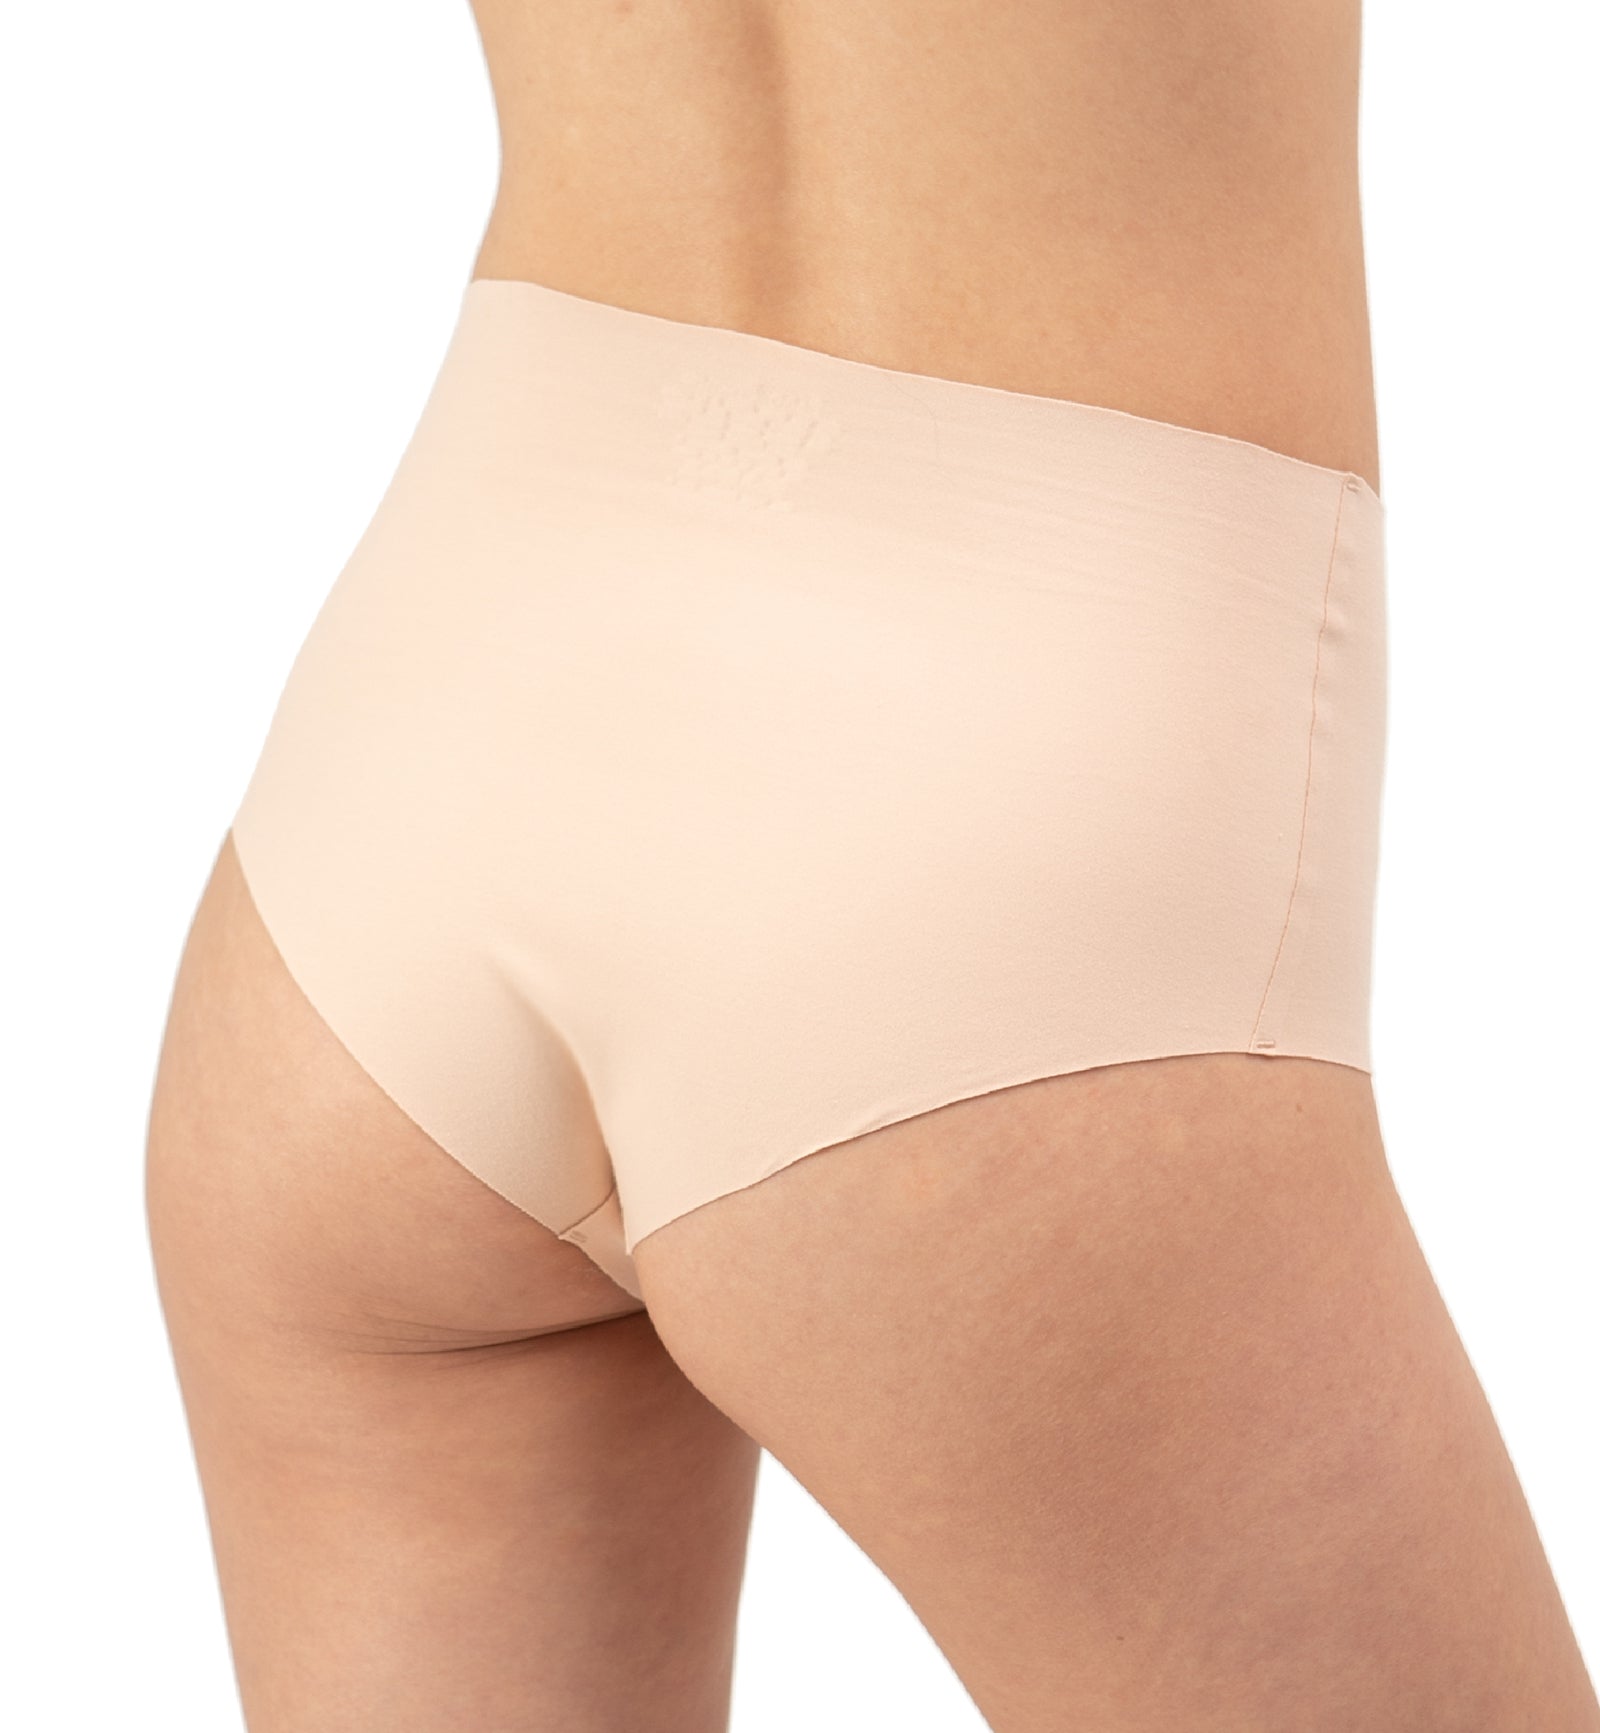 Panty Promise High Waist Hipster,XS,Pale - Pale,XS